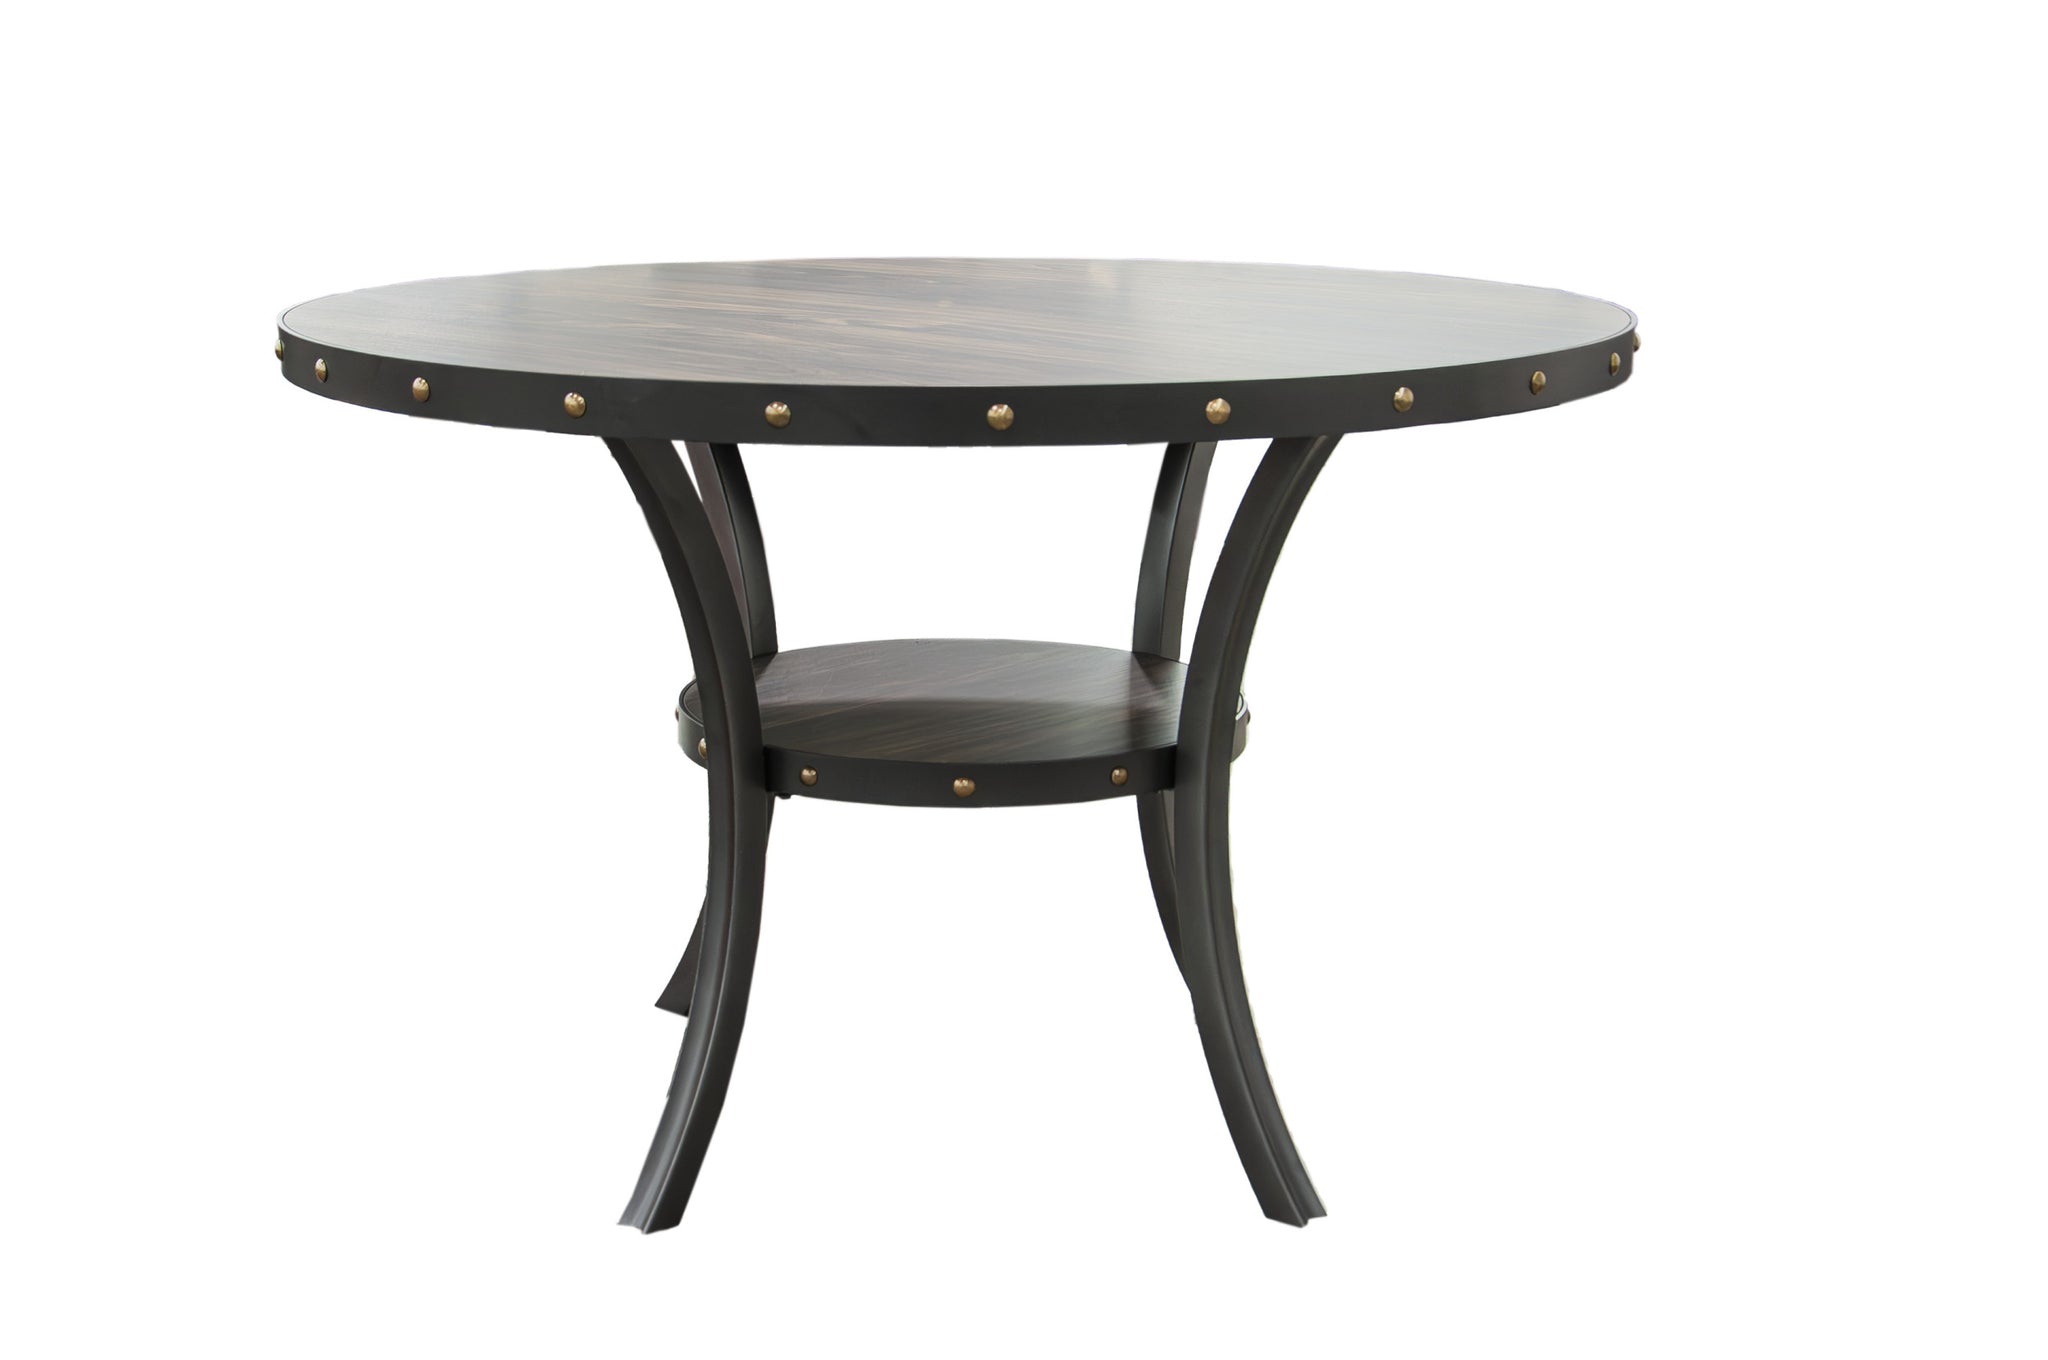 Modern Classic Dining Room Furniture Natural Wood wood-dining room-rubberwood-round-dining table